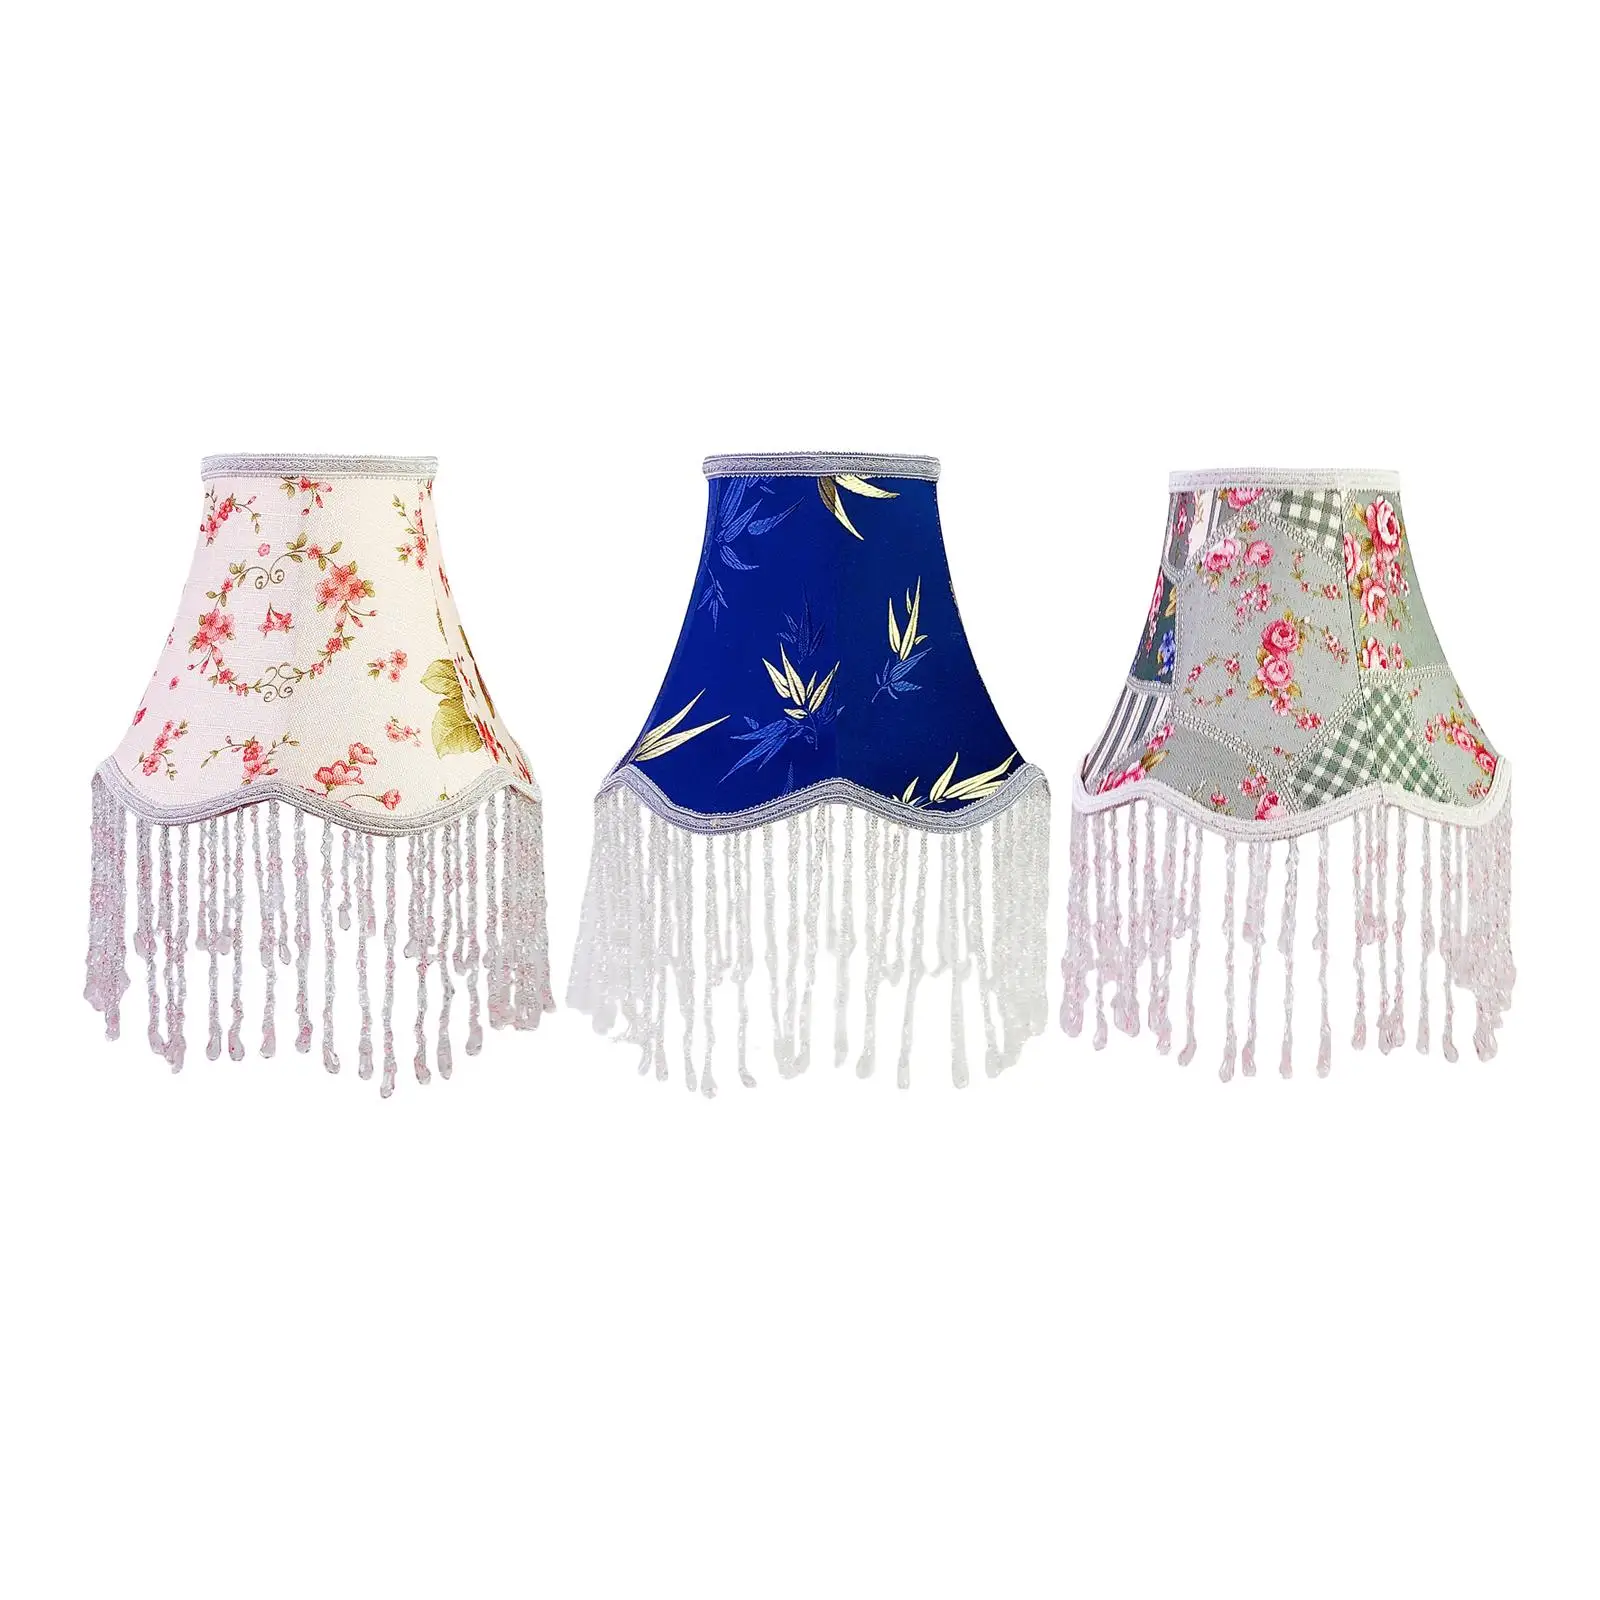 Lamp Shade with Fringe Beads Vintage for Pendant Light Shade European Lampshade for Home Dining Room Living Room Hotel Decor